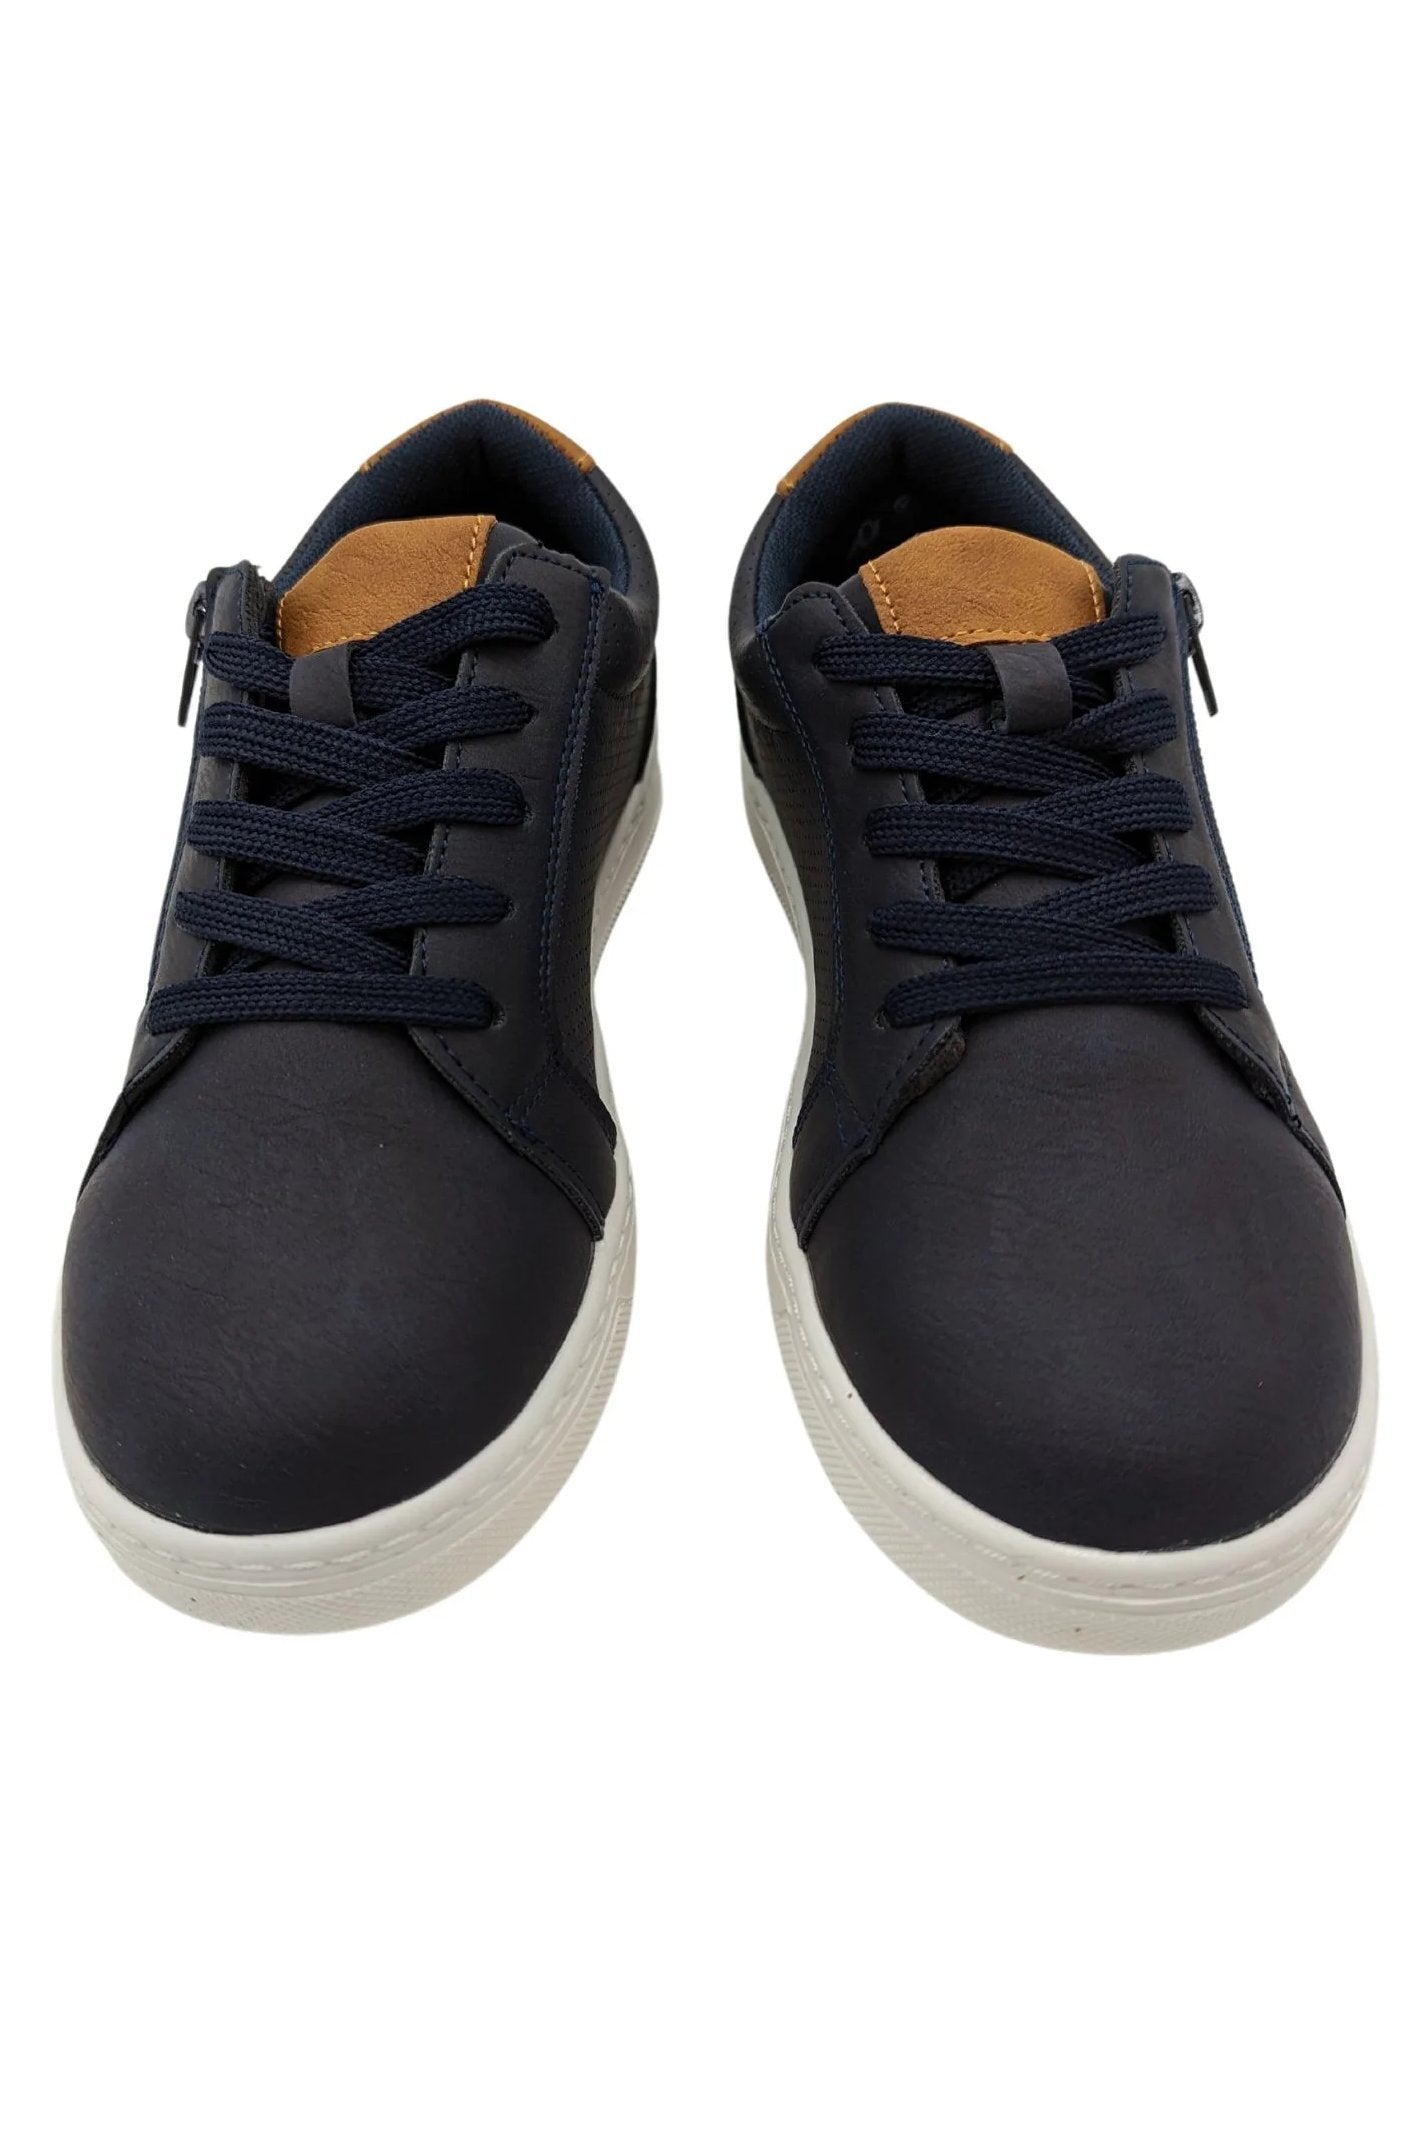 Lex Boys Navy Shoes-Front view